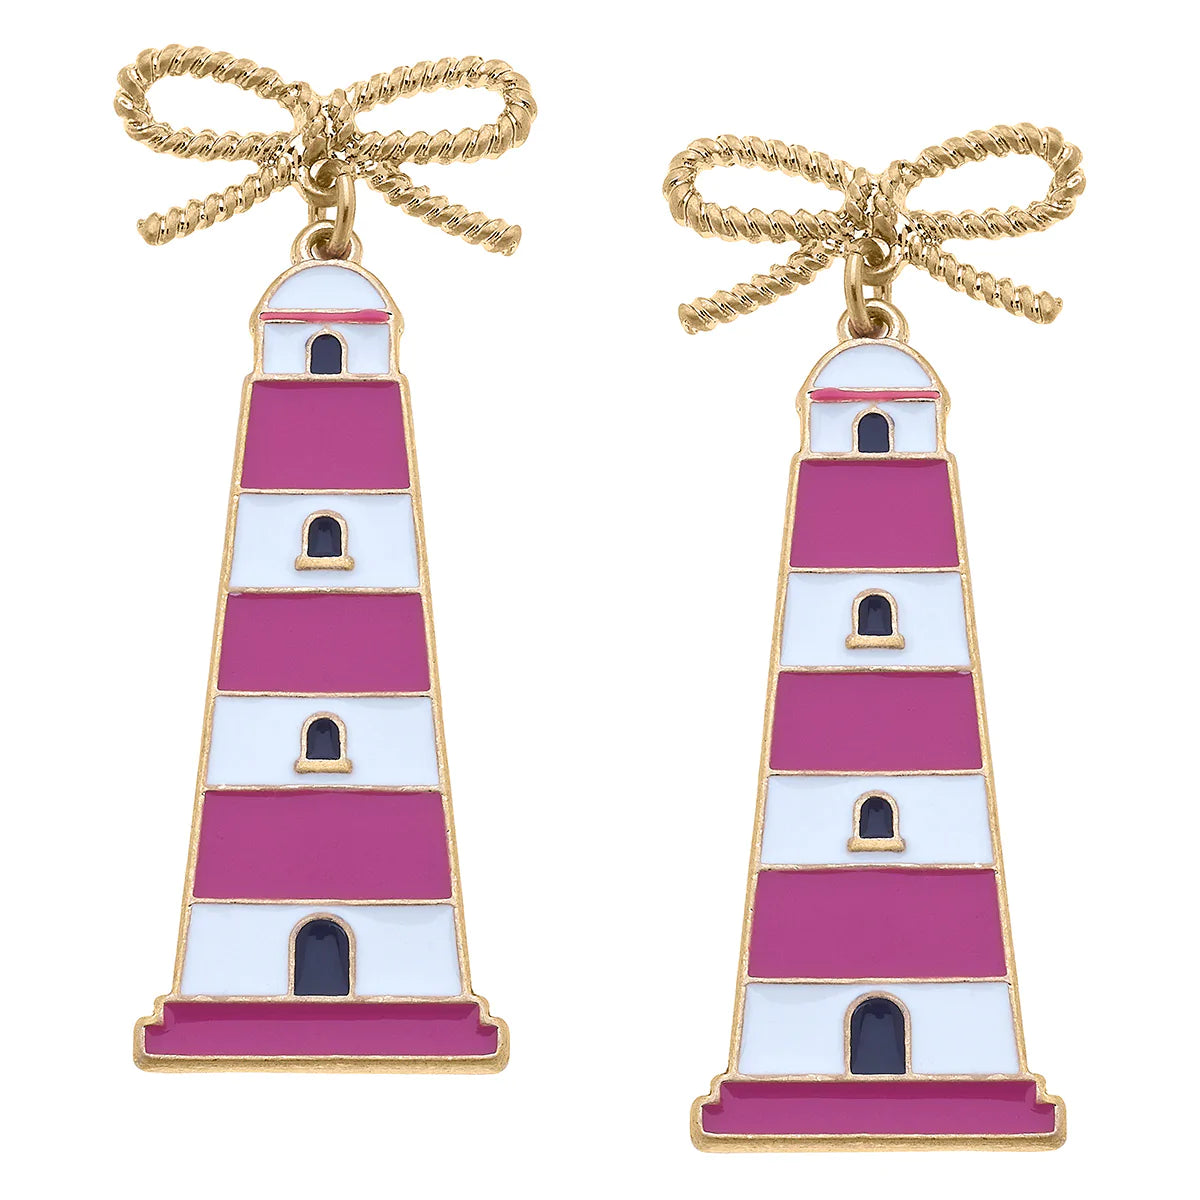 Luna Lighthouse Earrings,Pink/White